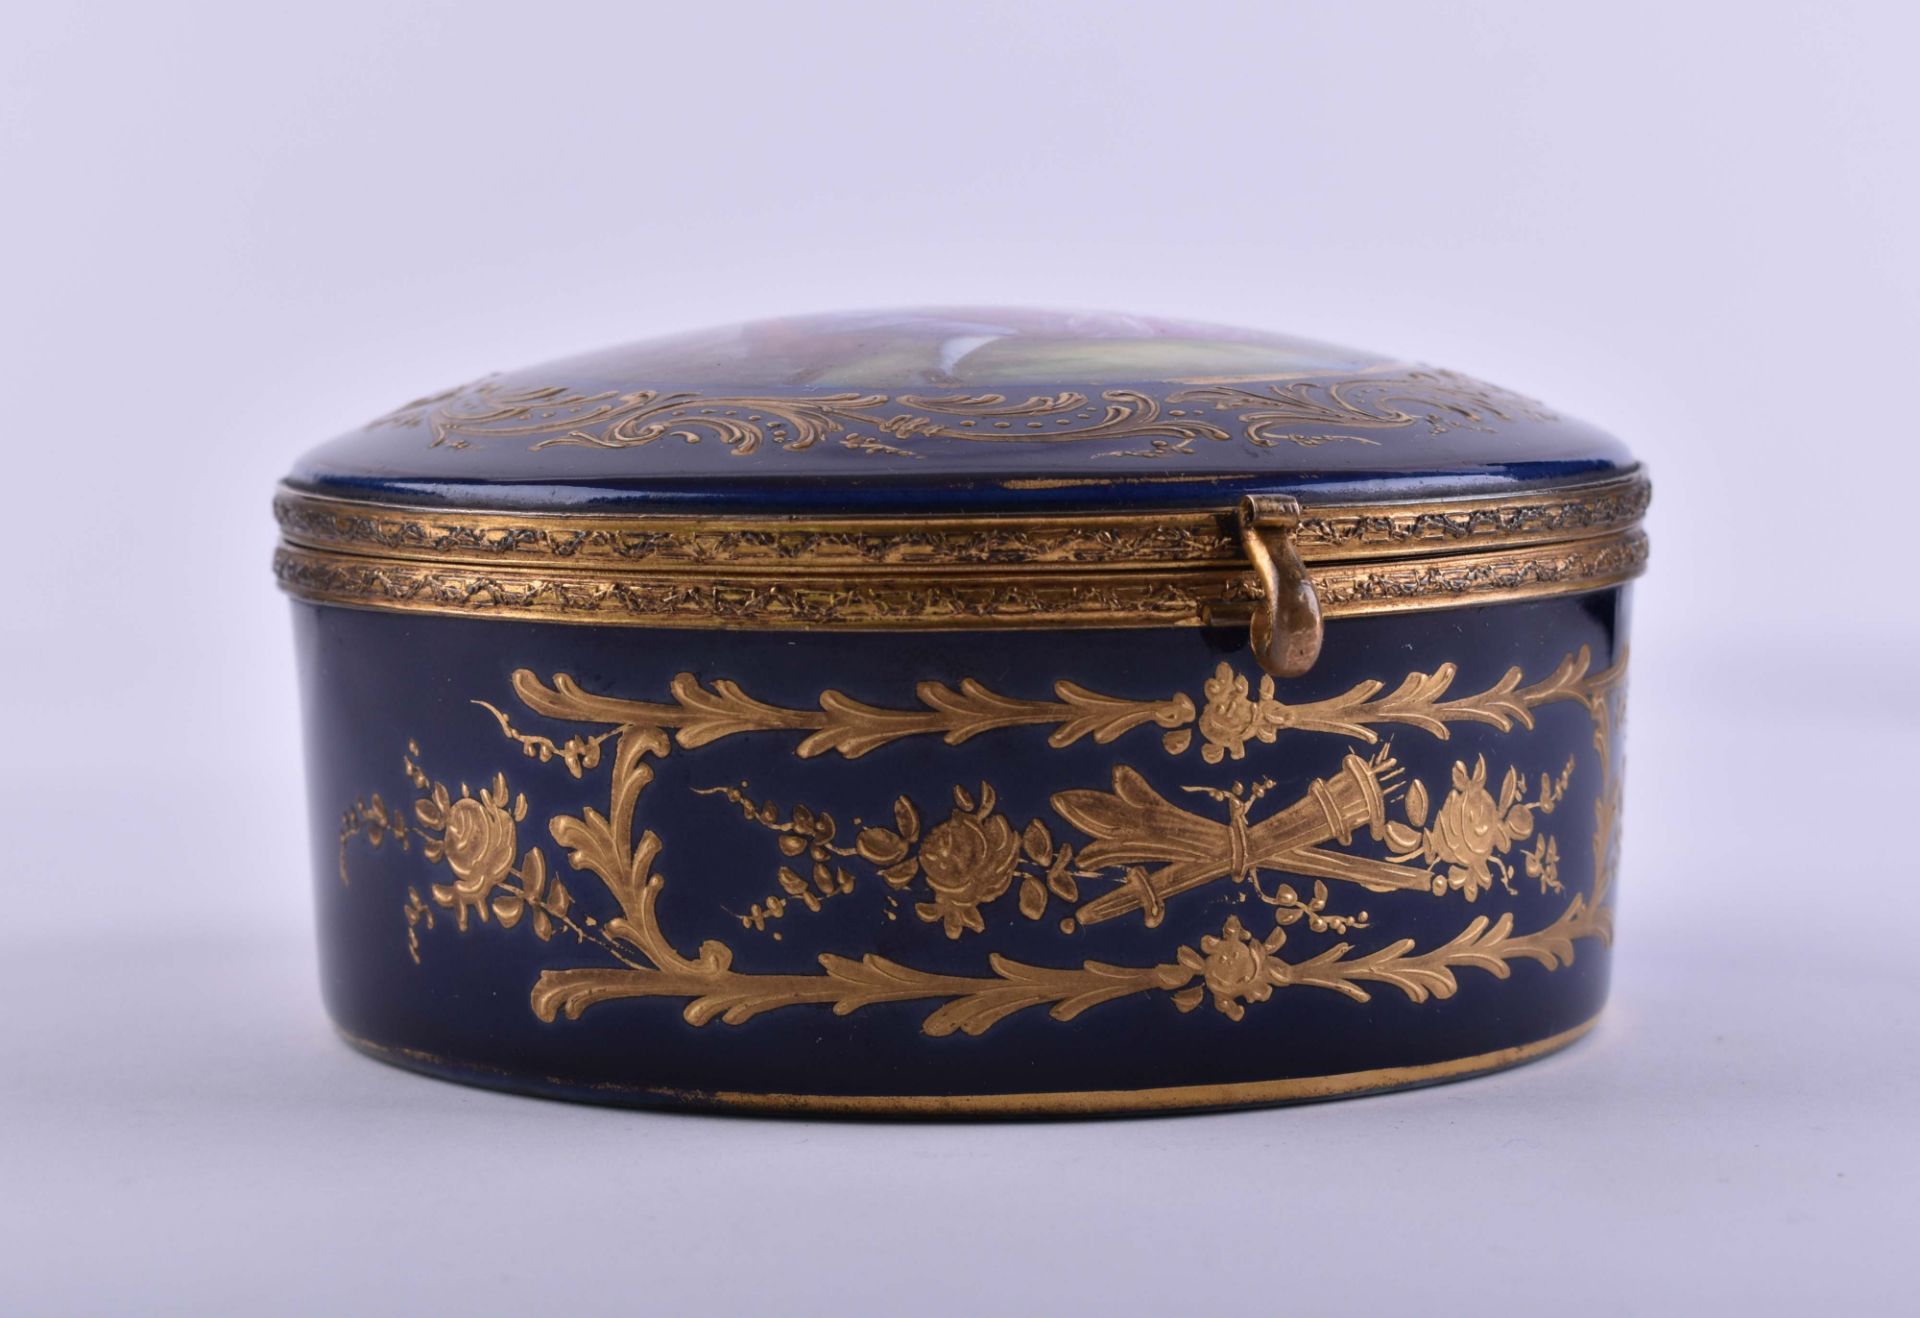  Porcelain cover box Sevres - Image 4 of 6